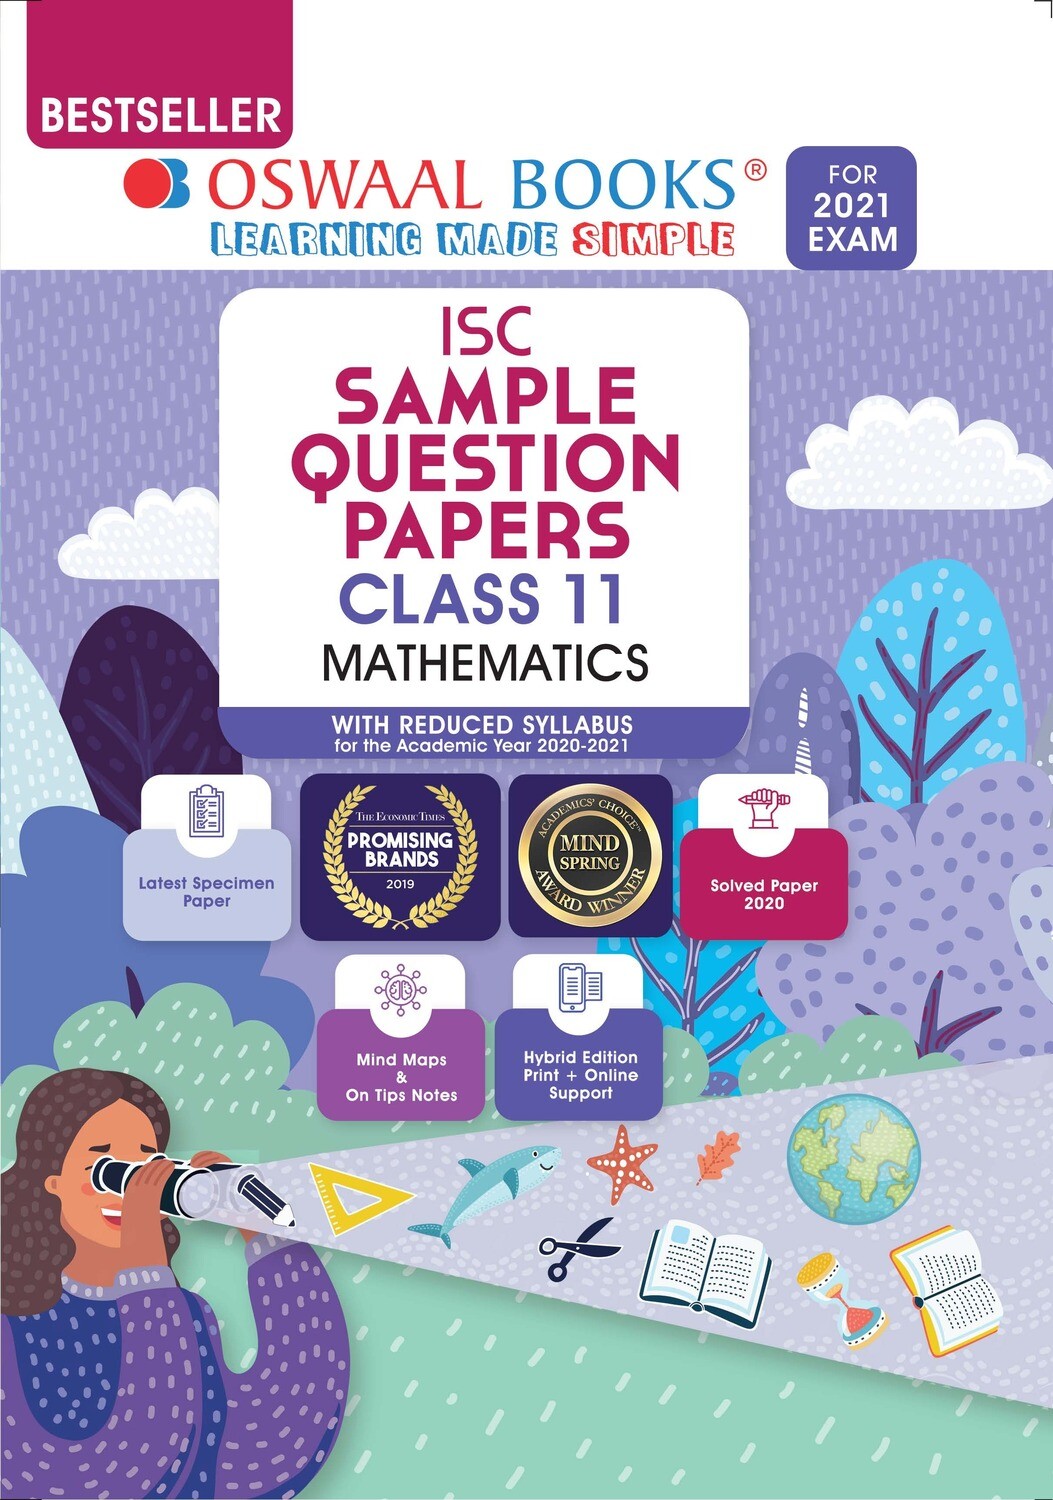 Buy e-book: Oswaal ISC Sample Question Paper Class 11 Mathematics (For 2021 Exam)